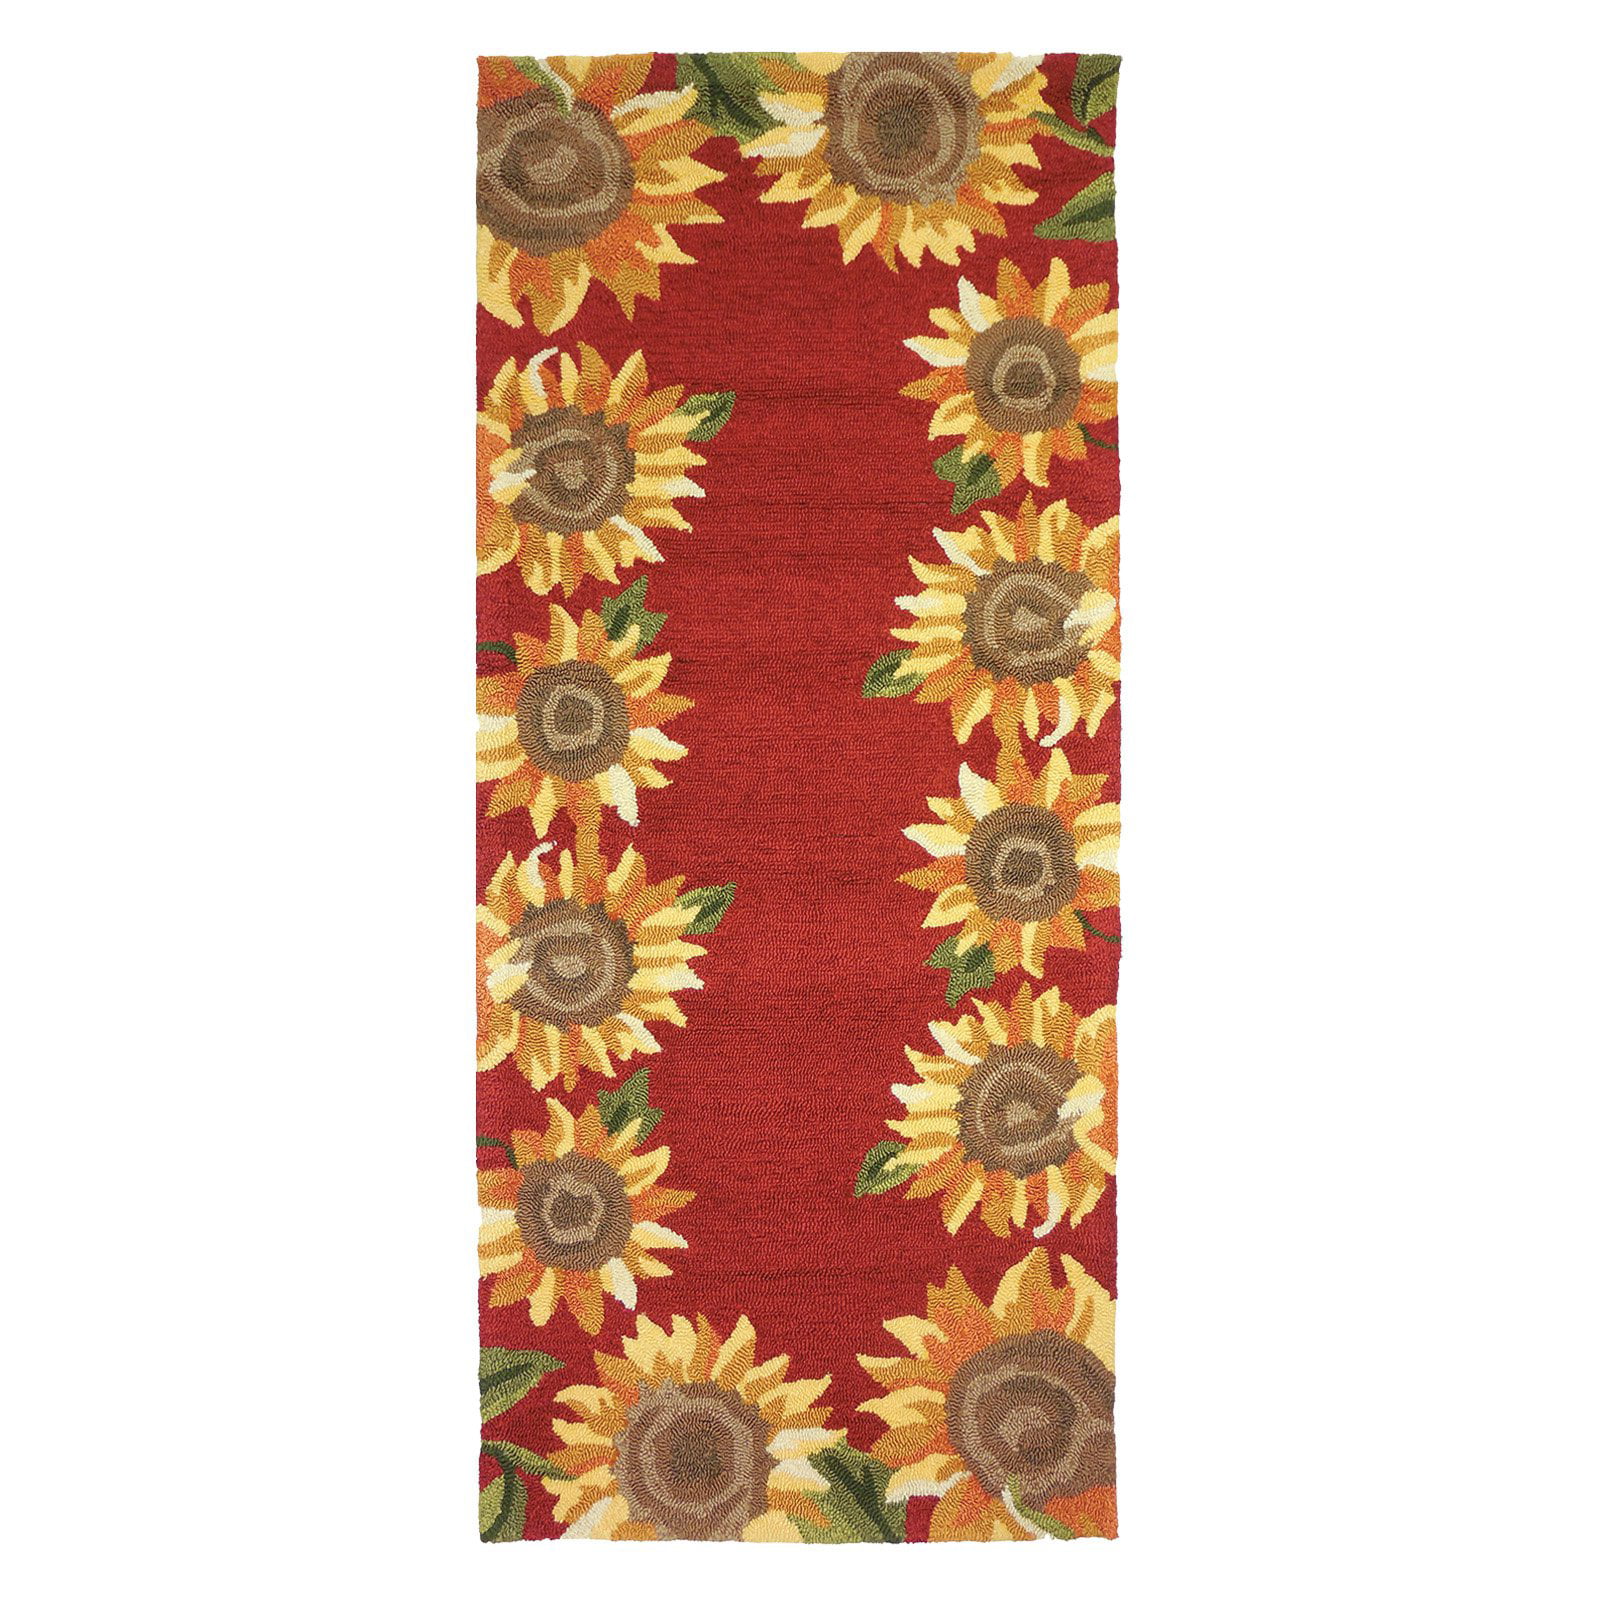 Homefires Rugs PPS-JB111B Sunflower Field Area Rug 22 x 34 in. 